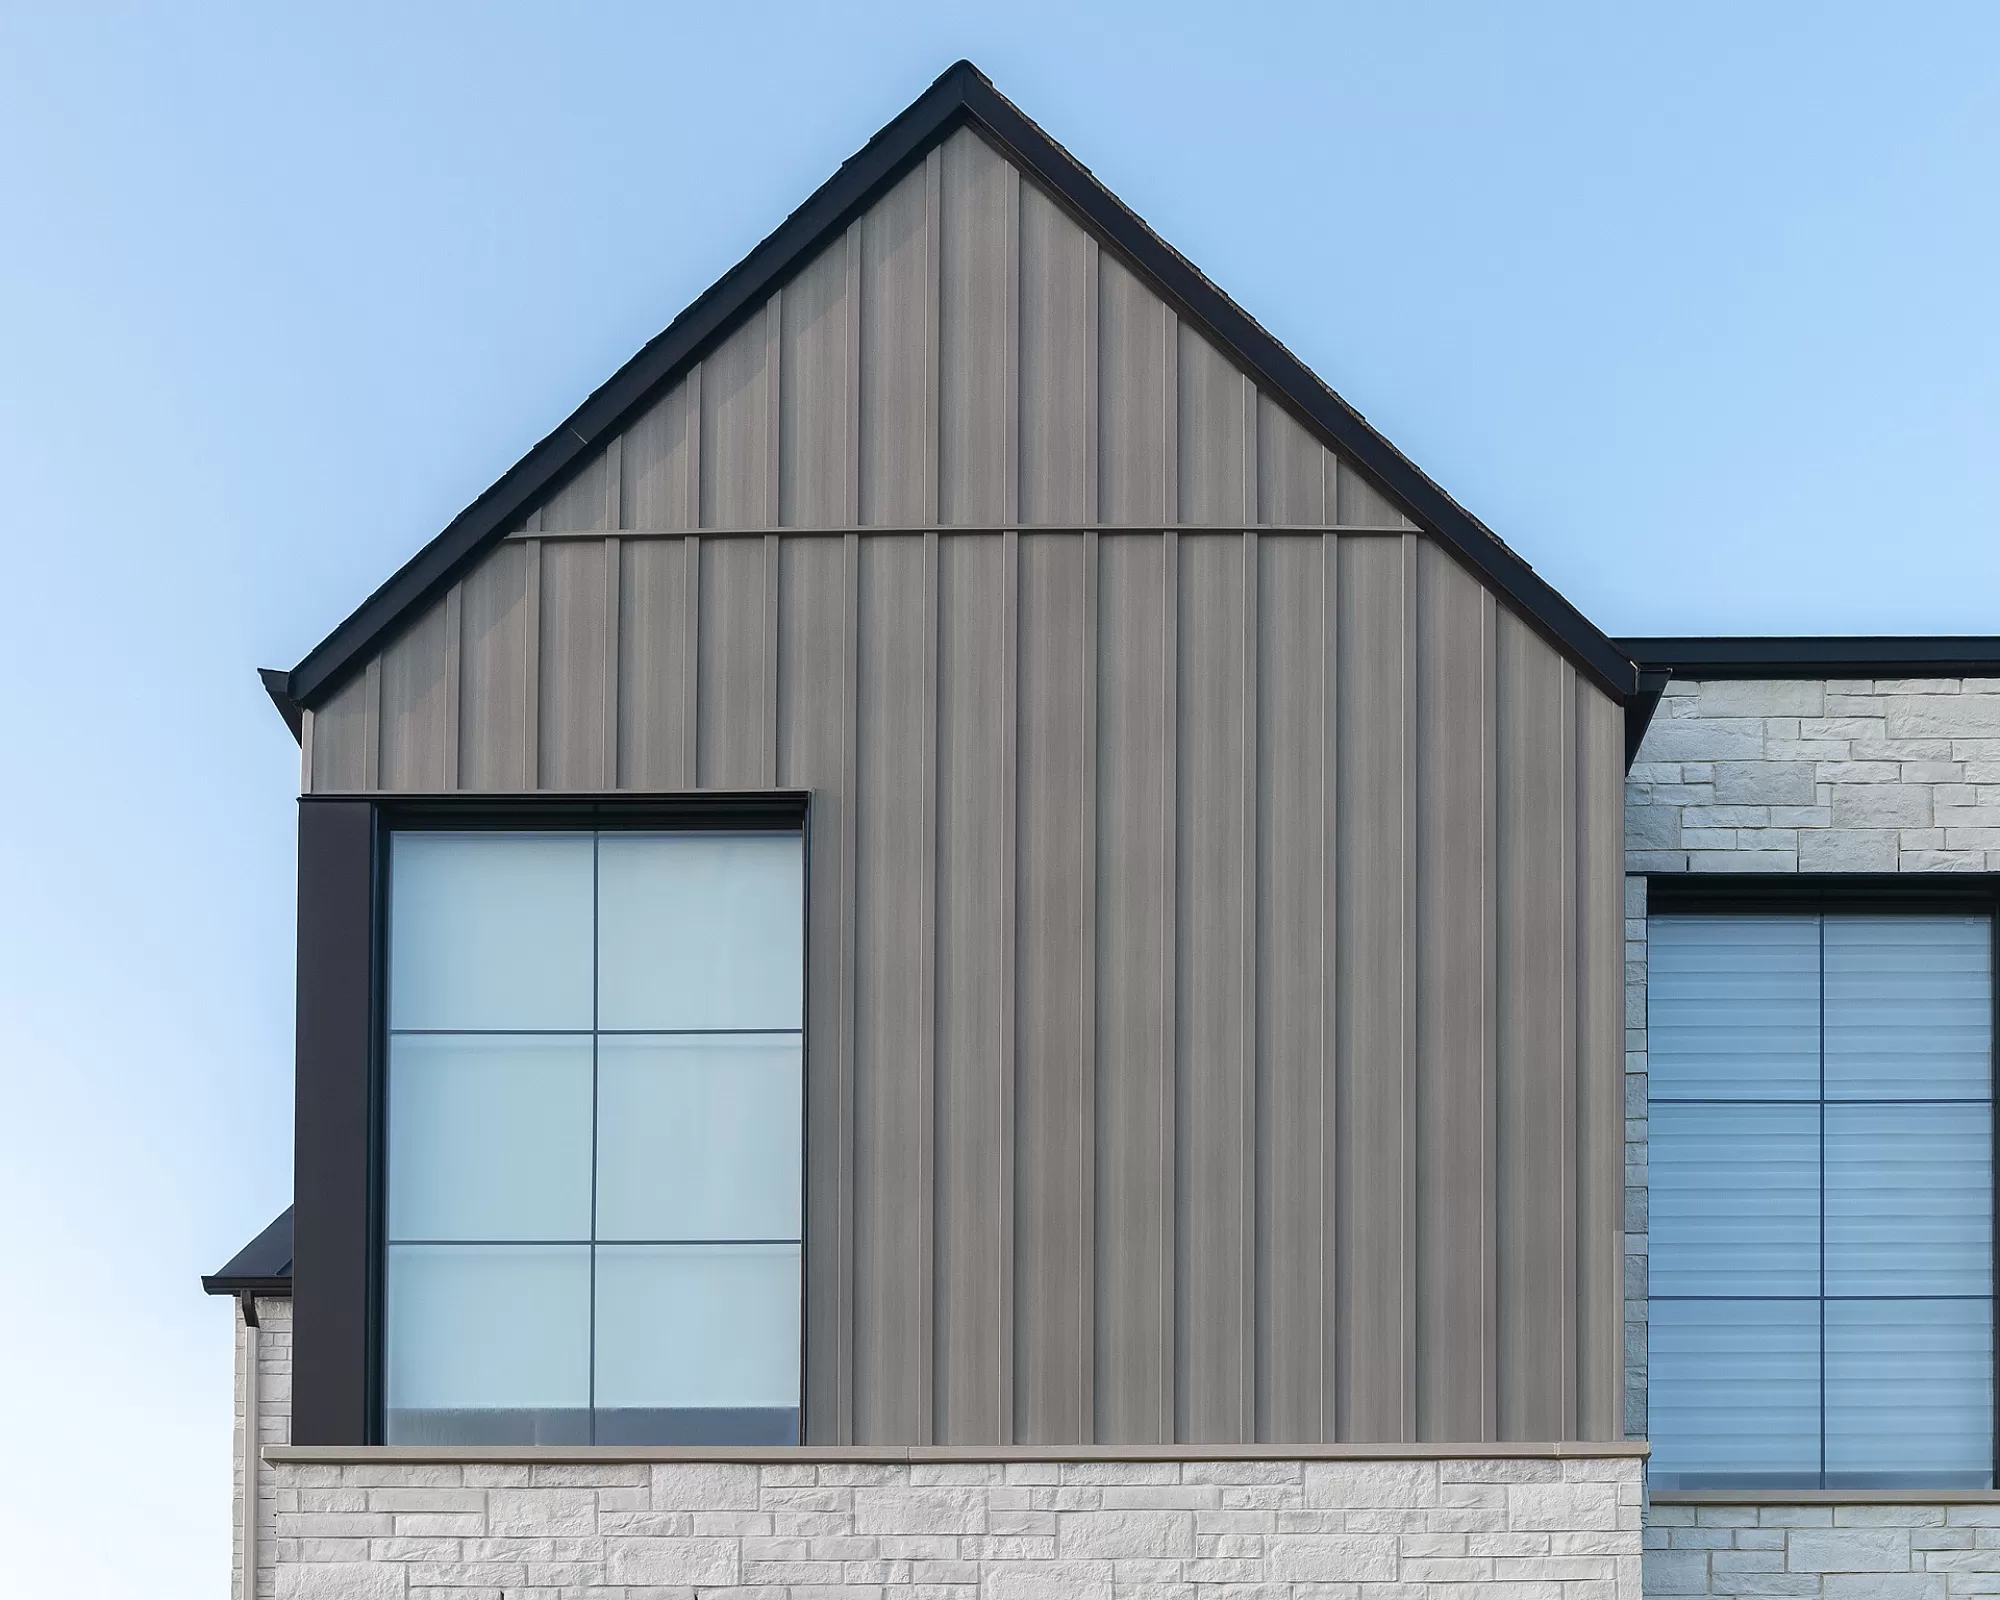 Why Choose Aluminum Siding for your Homes Exterior on the Rialux blog